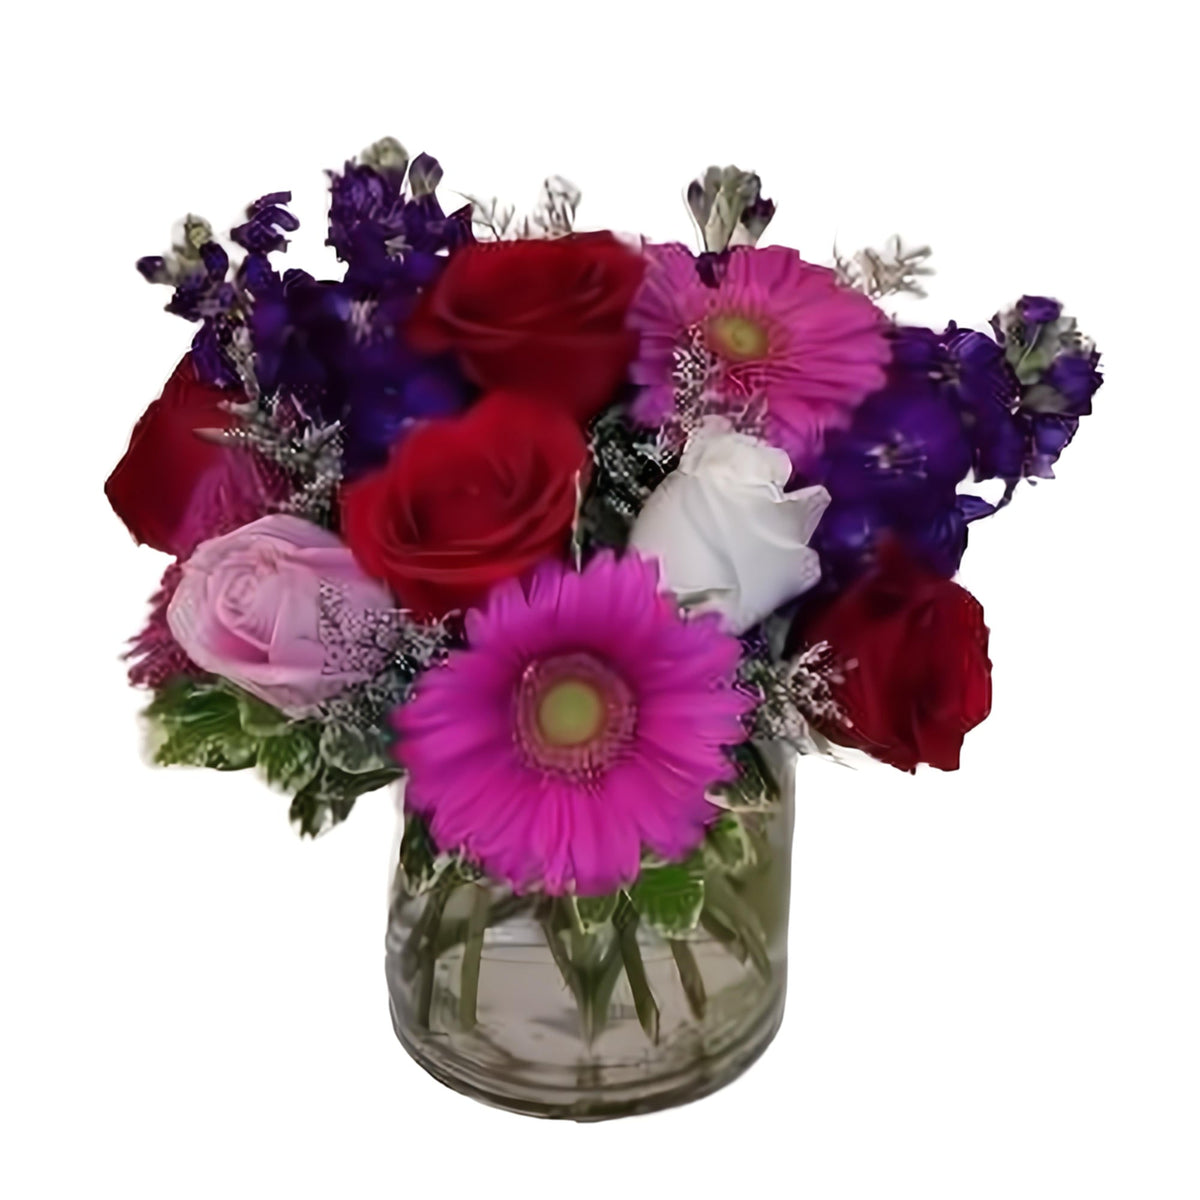 Fields of Dreams floral arrangement, hand crafted by Queens Flower Delivery, includes Daisy Gerberas, Roses, and Purple Stock